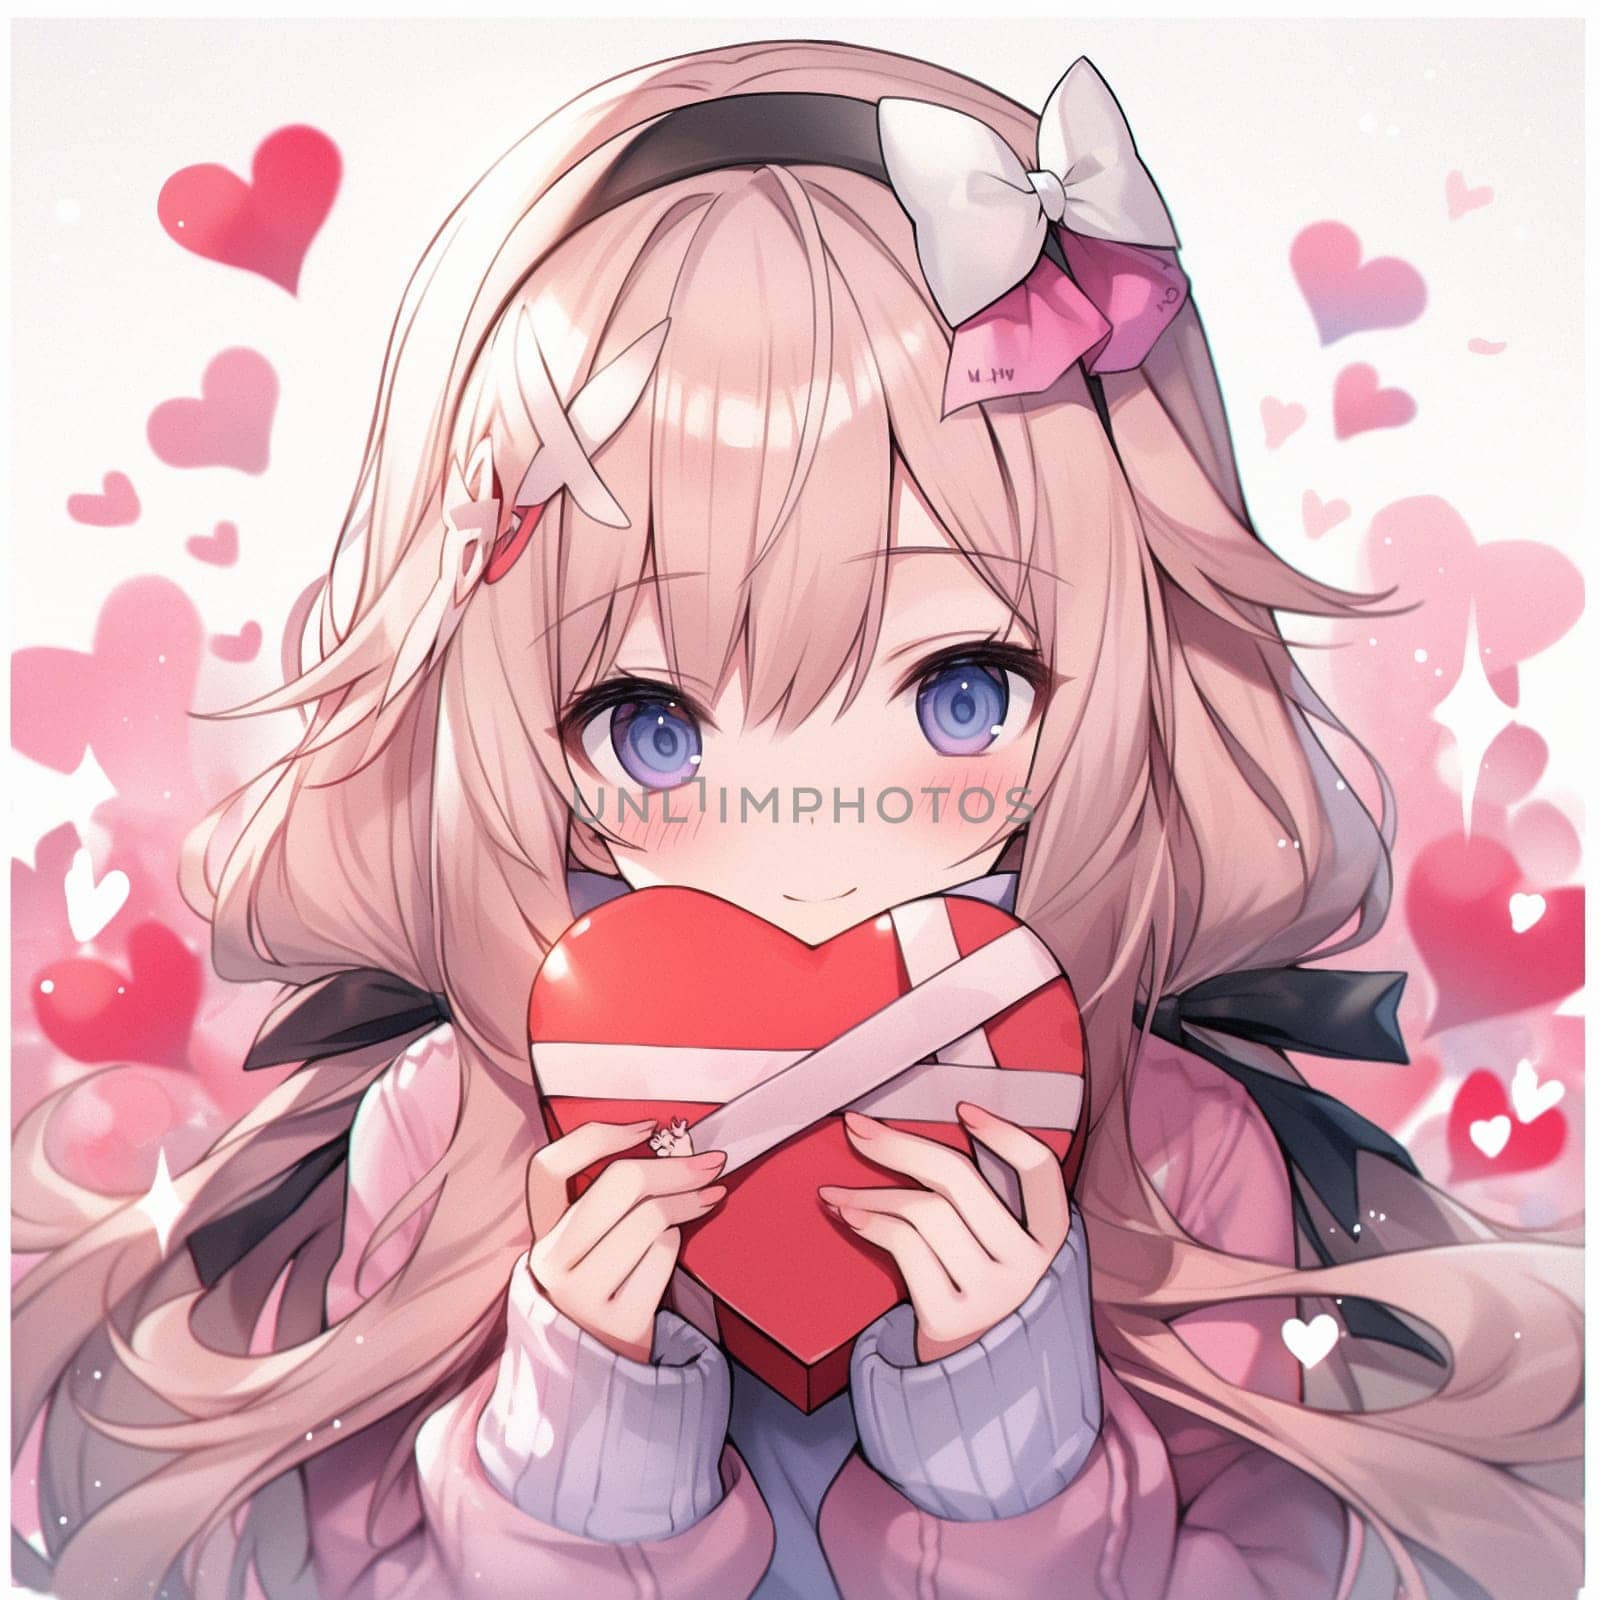 A beautiful girl full of love in the Anime style. A beautiful drawing for Valentine's Day. High quality illustration